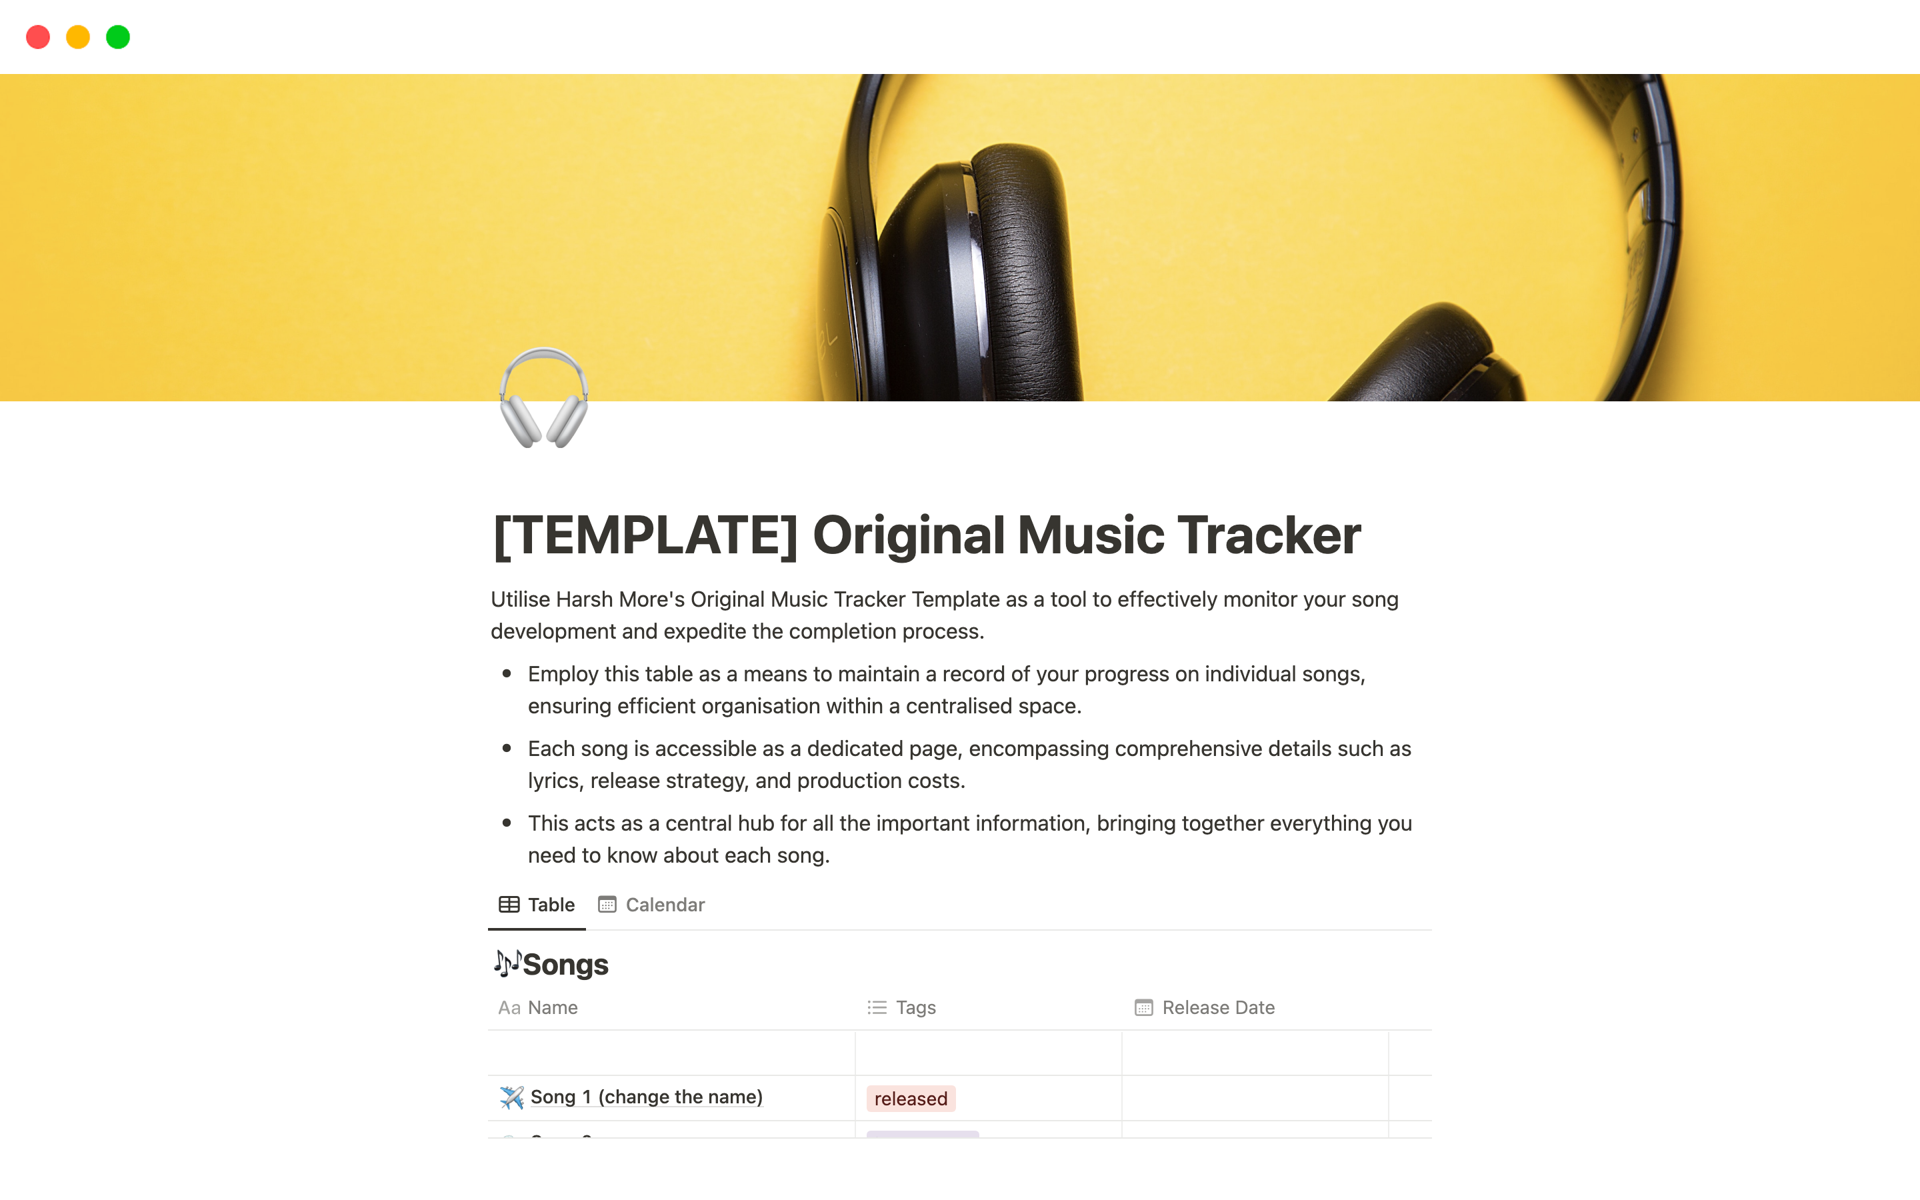 The Original Music Tracker is a comprehensive tool that simplifies the organization and management of original music projects, providing a centralized hub for tracking progress for musicians.